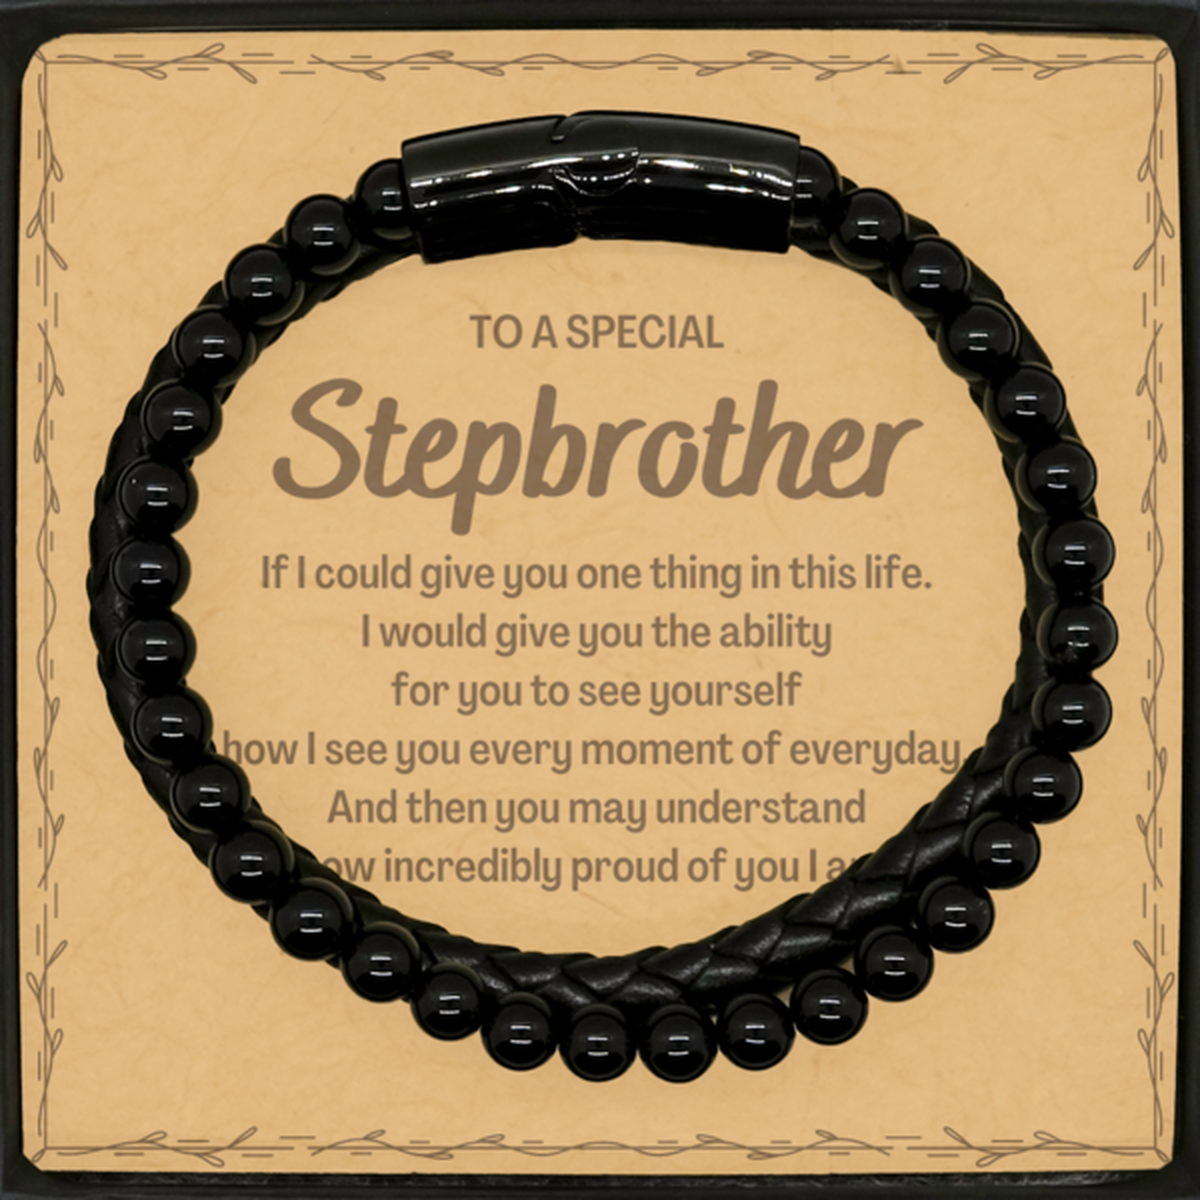 To My Stepbrother Stone Leather Bracelets, Gifts For Stepbrother Message Card, Inspirational Gifts for Christmas Birthday, Epic Gifts for Stepbrother To A Special Stepbrother how incredibly proud of you I am